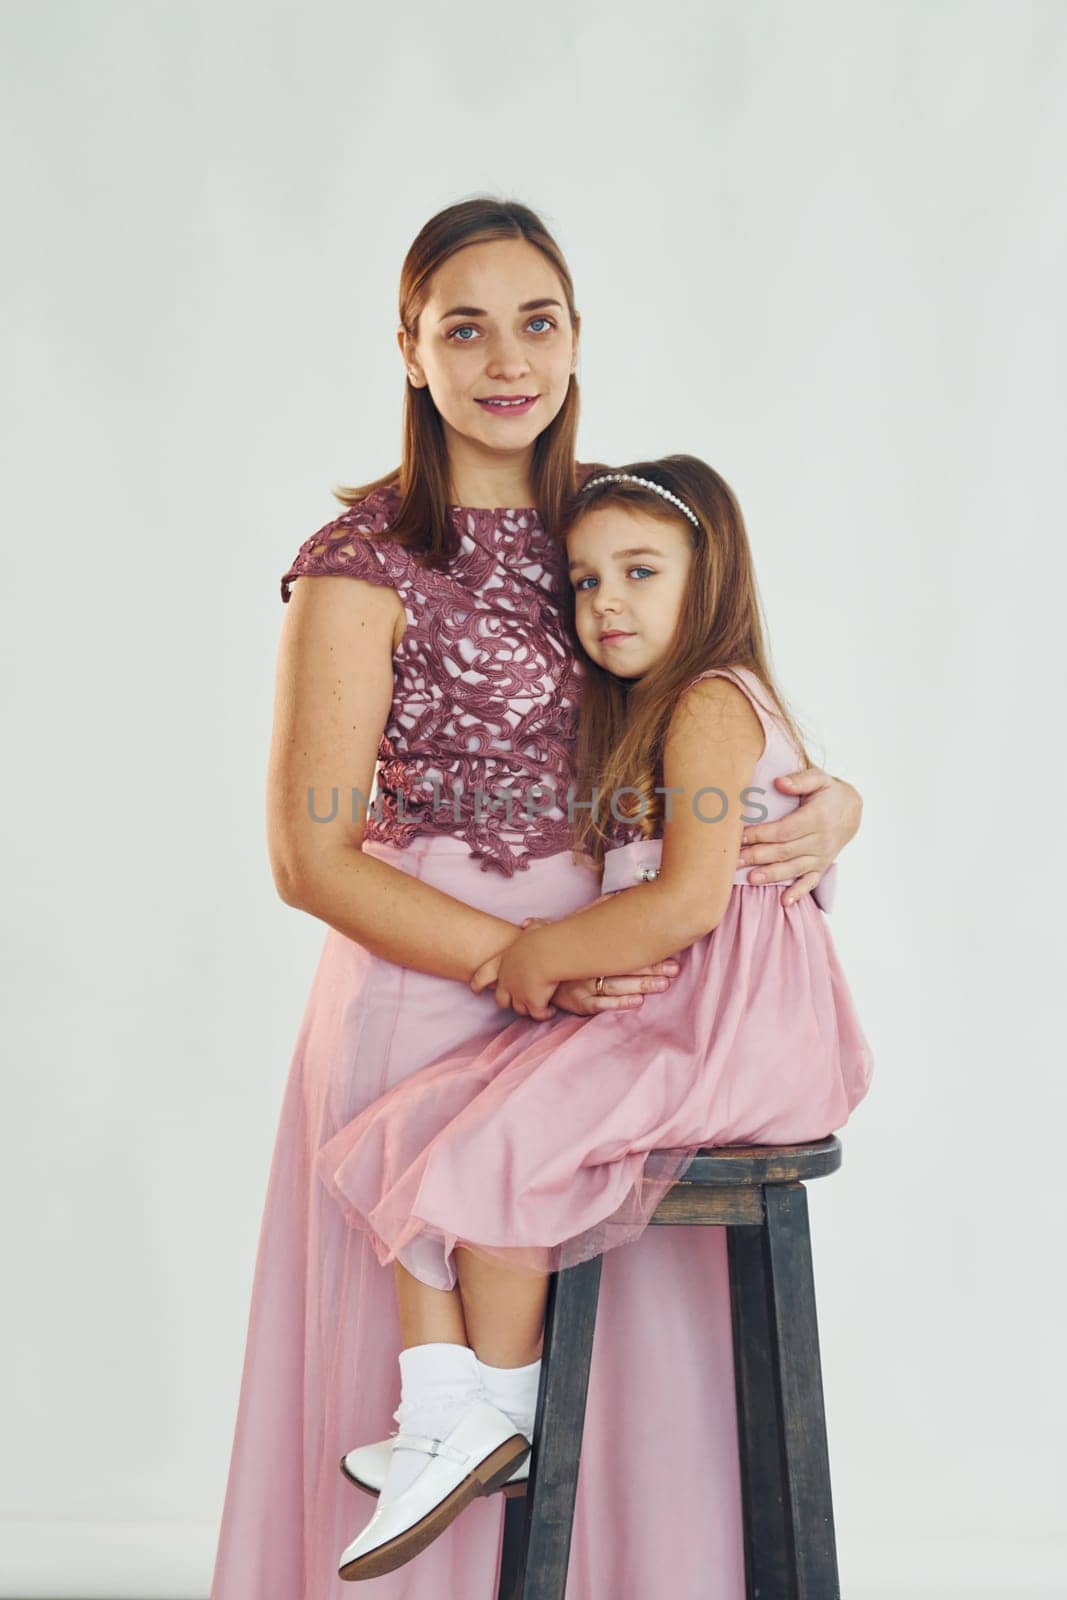 Woman in dress standing with her daughter in the studio with white background.